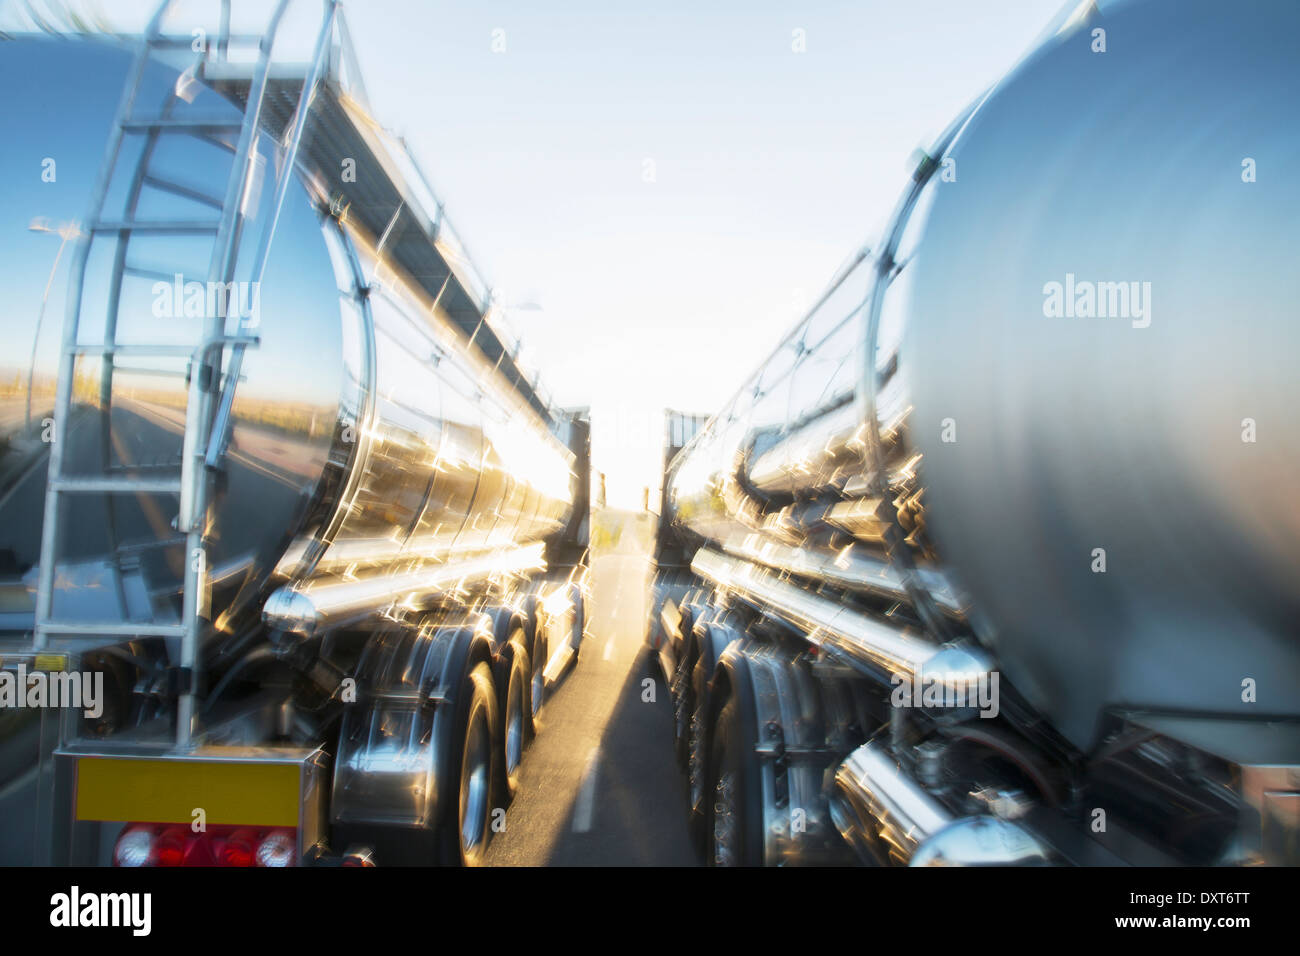 Stainless steel milk tankers side by side Stock Photo